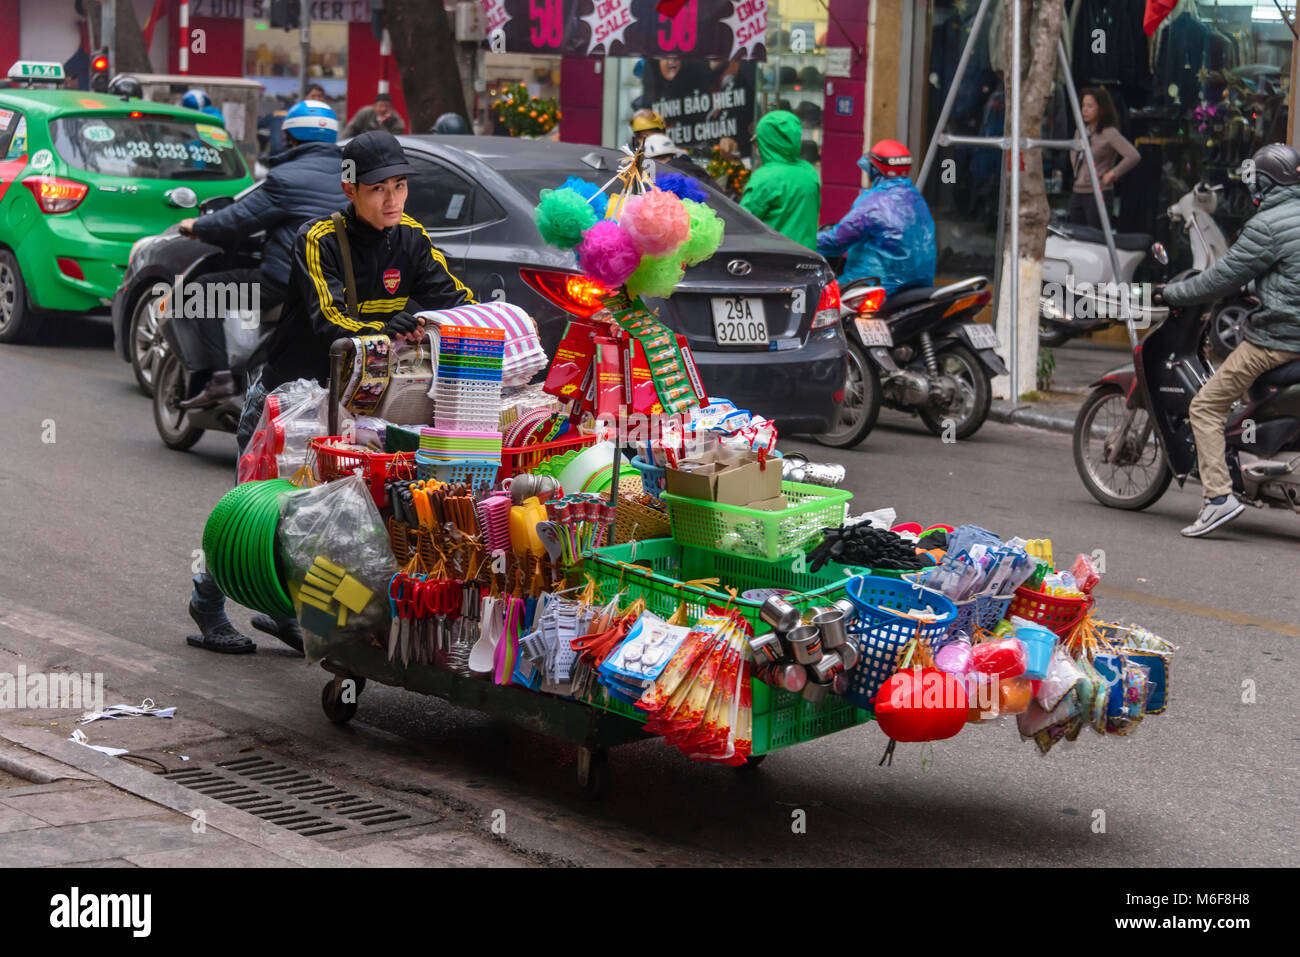 A man pushes a handcart loaded with household goods for sale in Hanoi, Vietnam Stock Photo